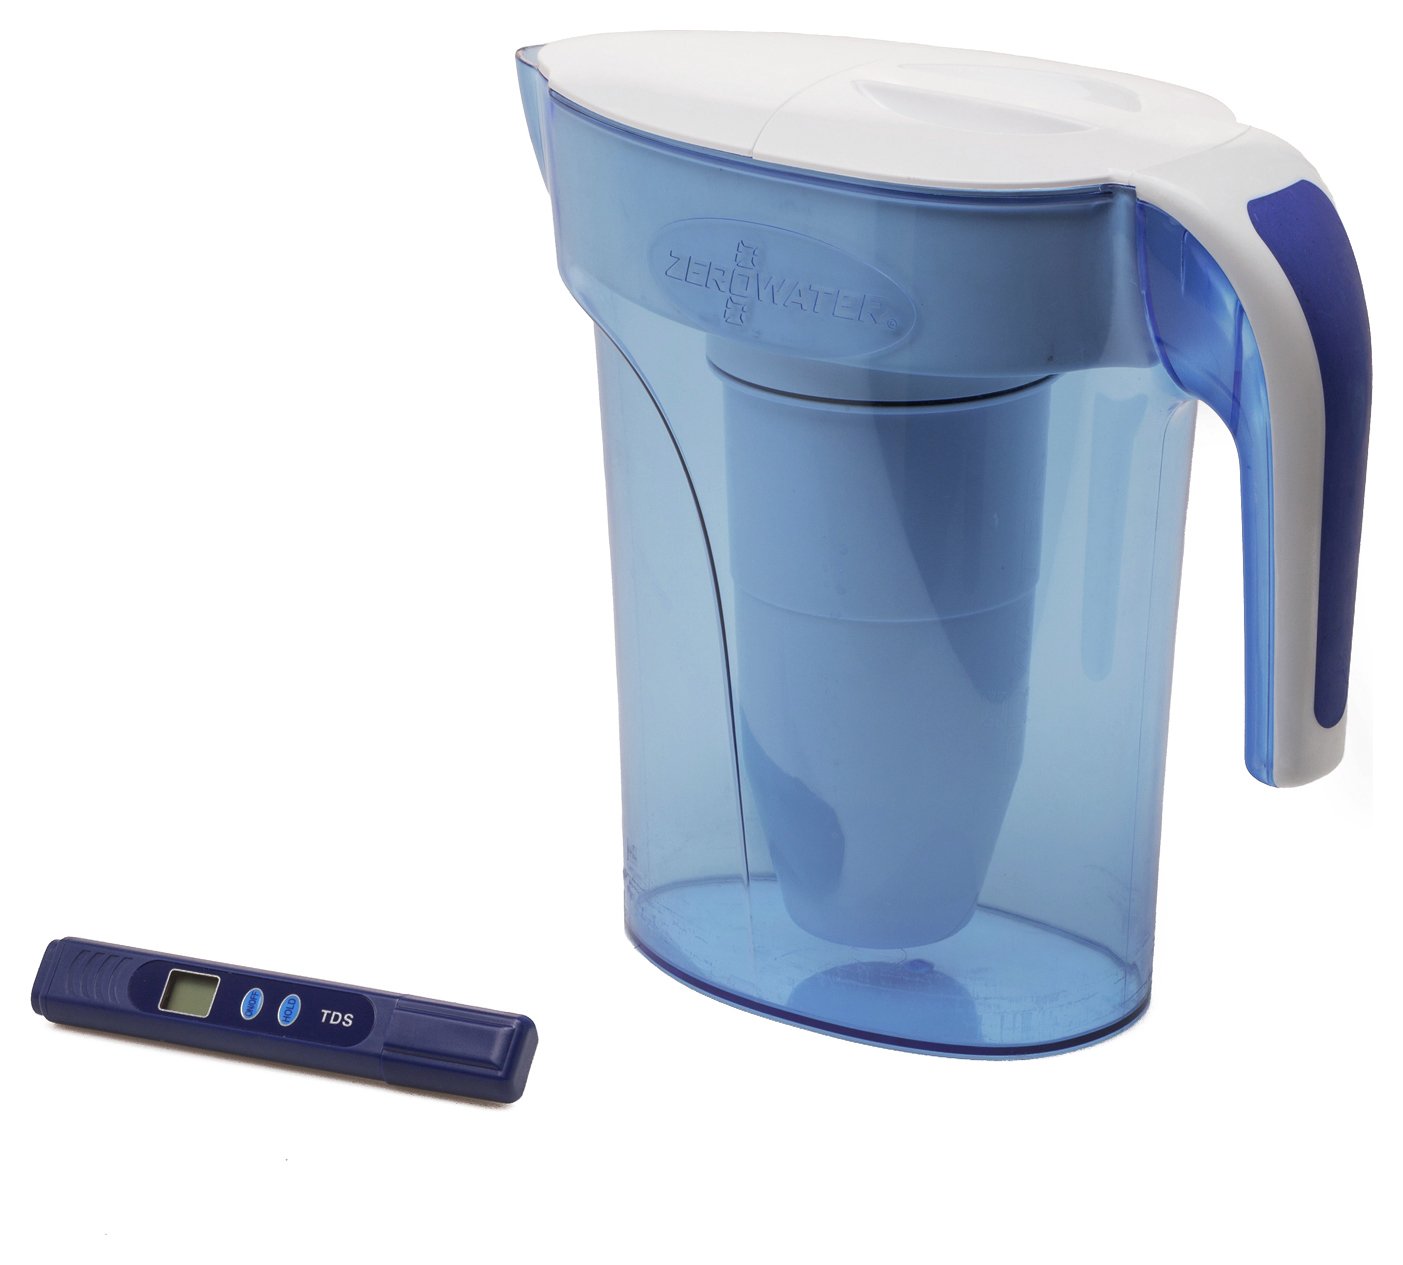 Zerowater 7 Cup Water Filter Jug review